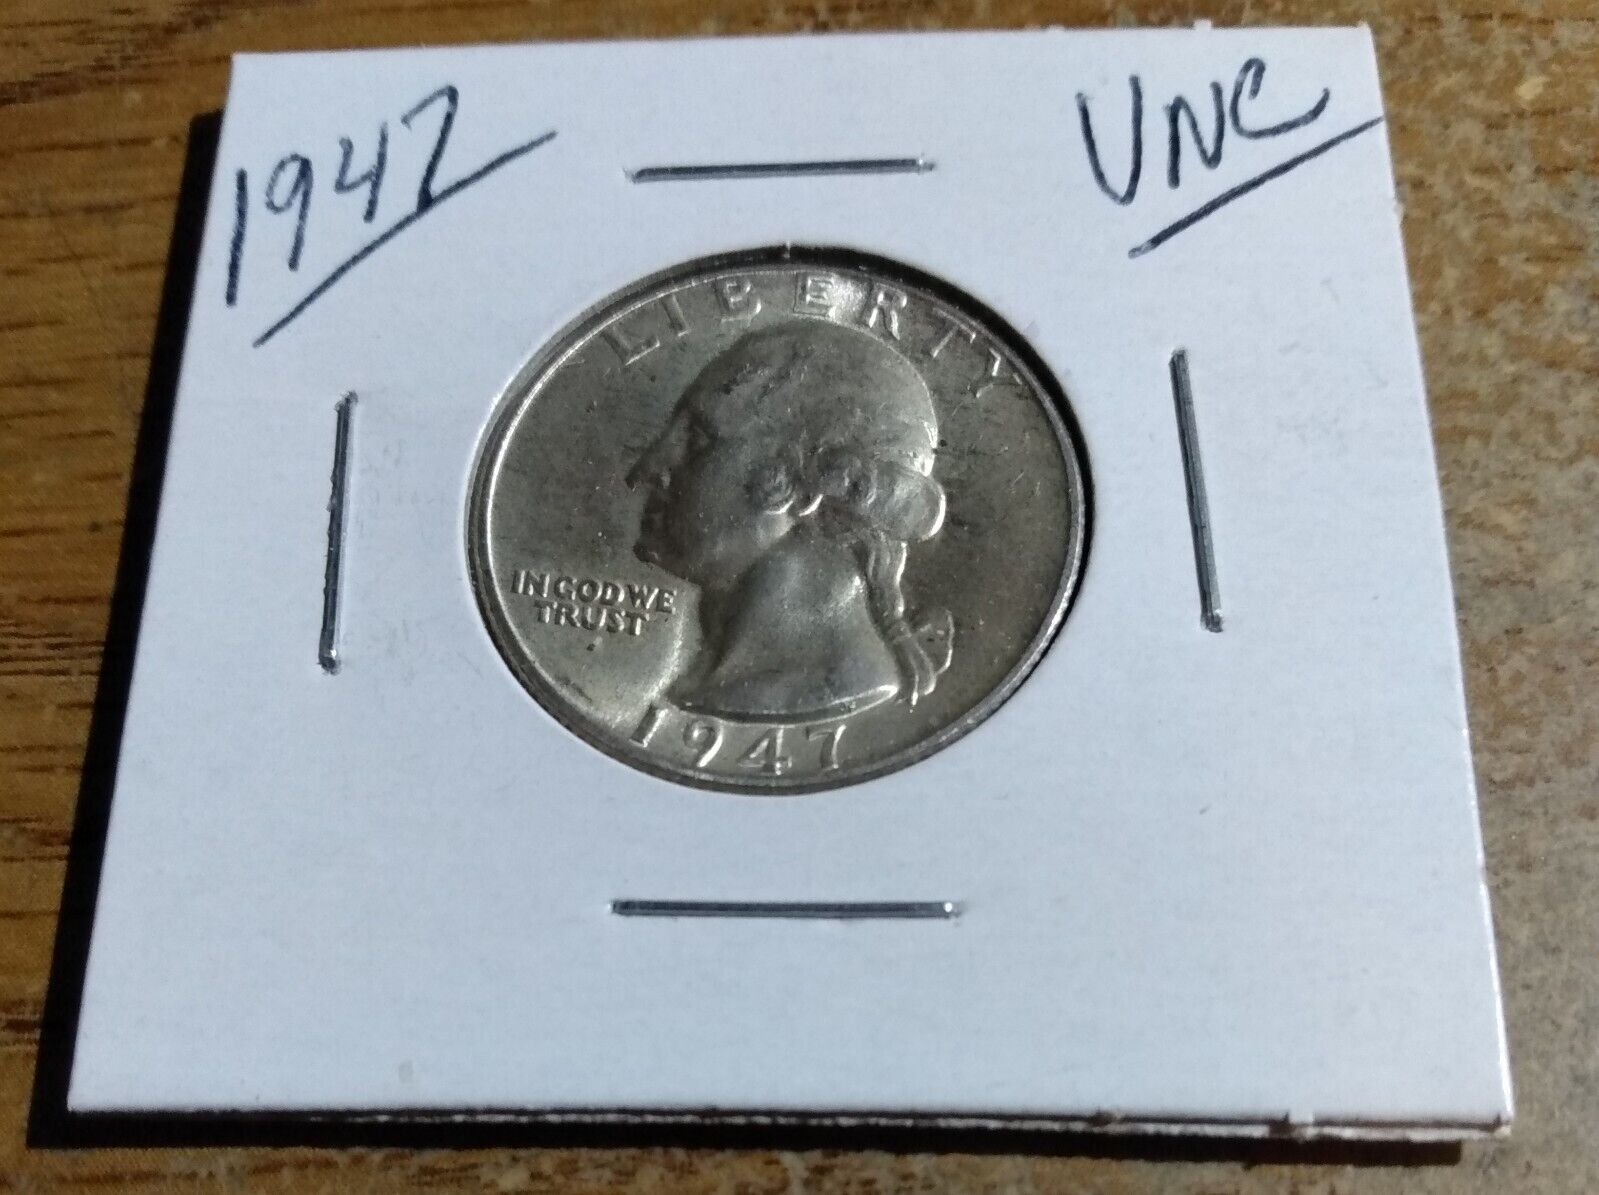 Primary image for 1947 Washington Quarter BU Uncirculated Mint State 90% Silver 25c US Coin